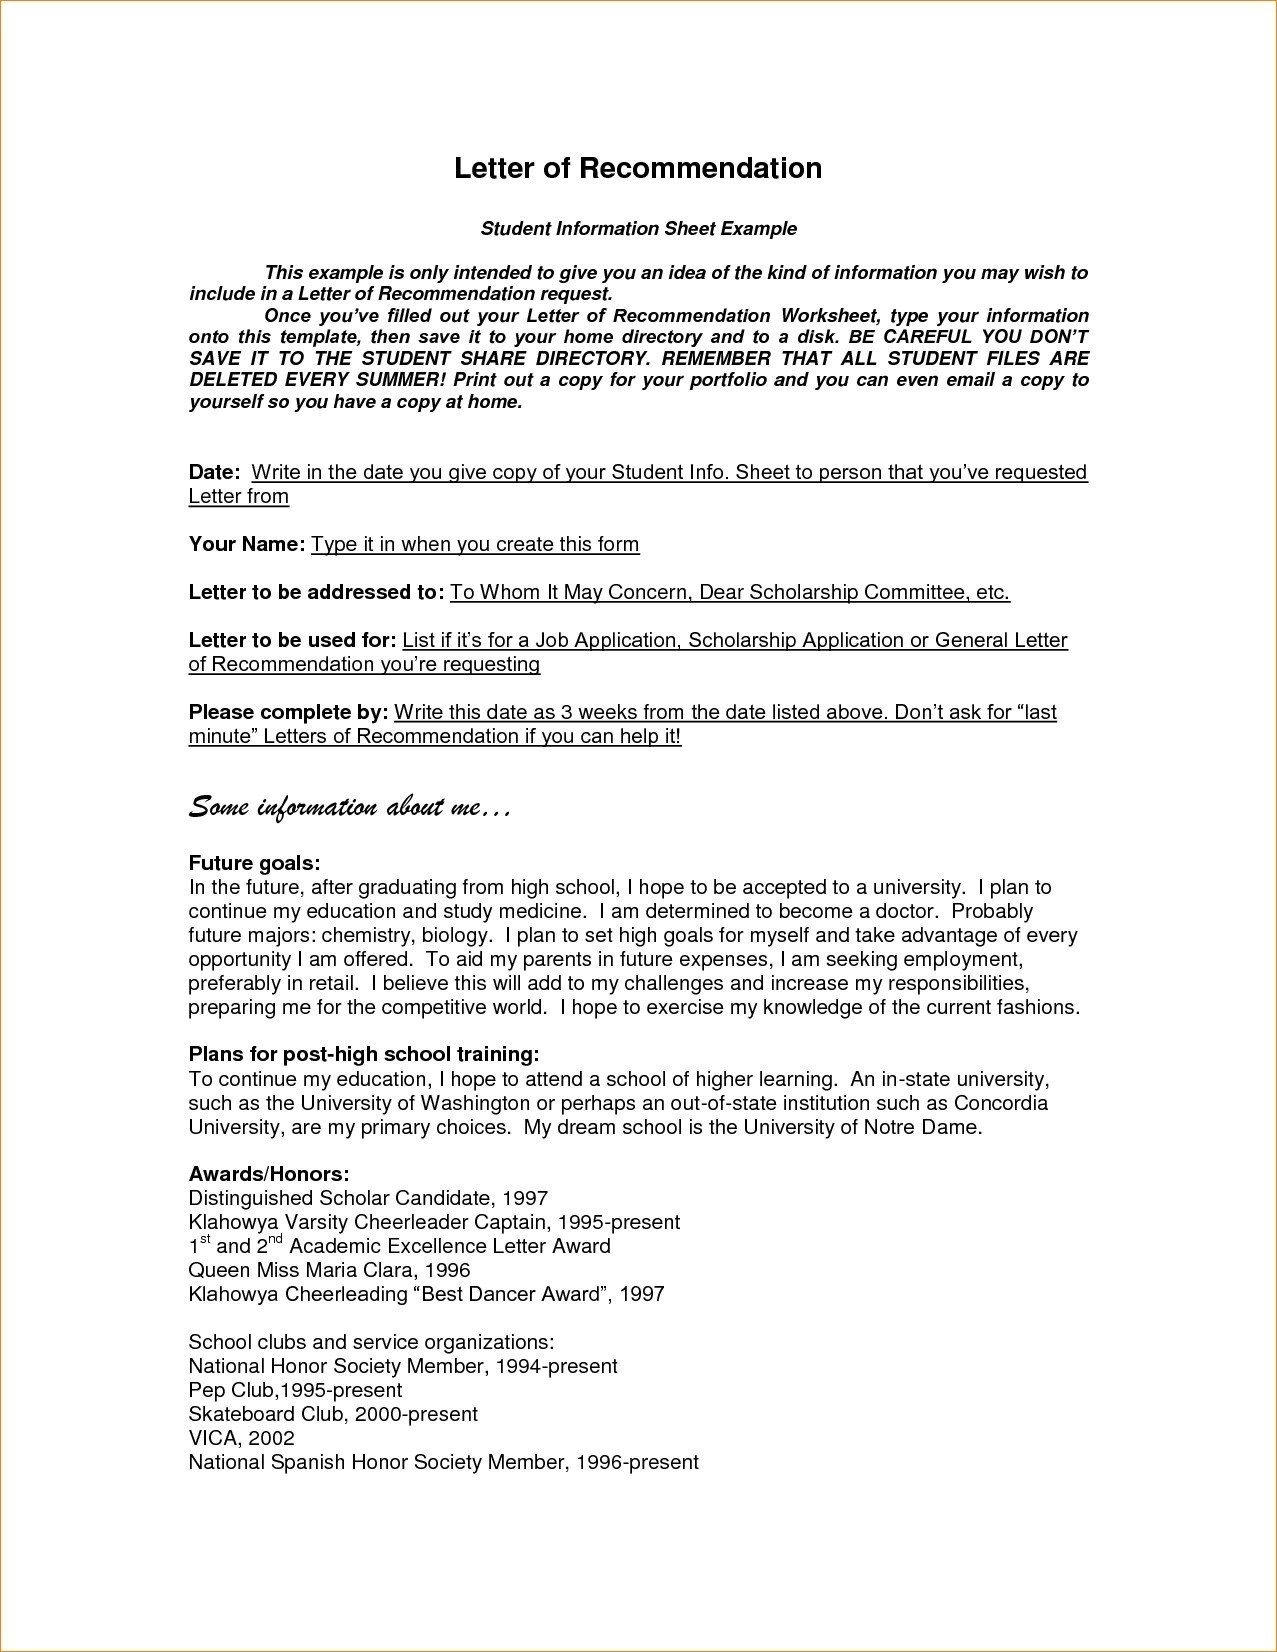 Letter Of Recommendation Template Letter Of Recommendation For National Honor Society Letter